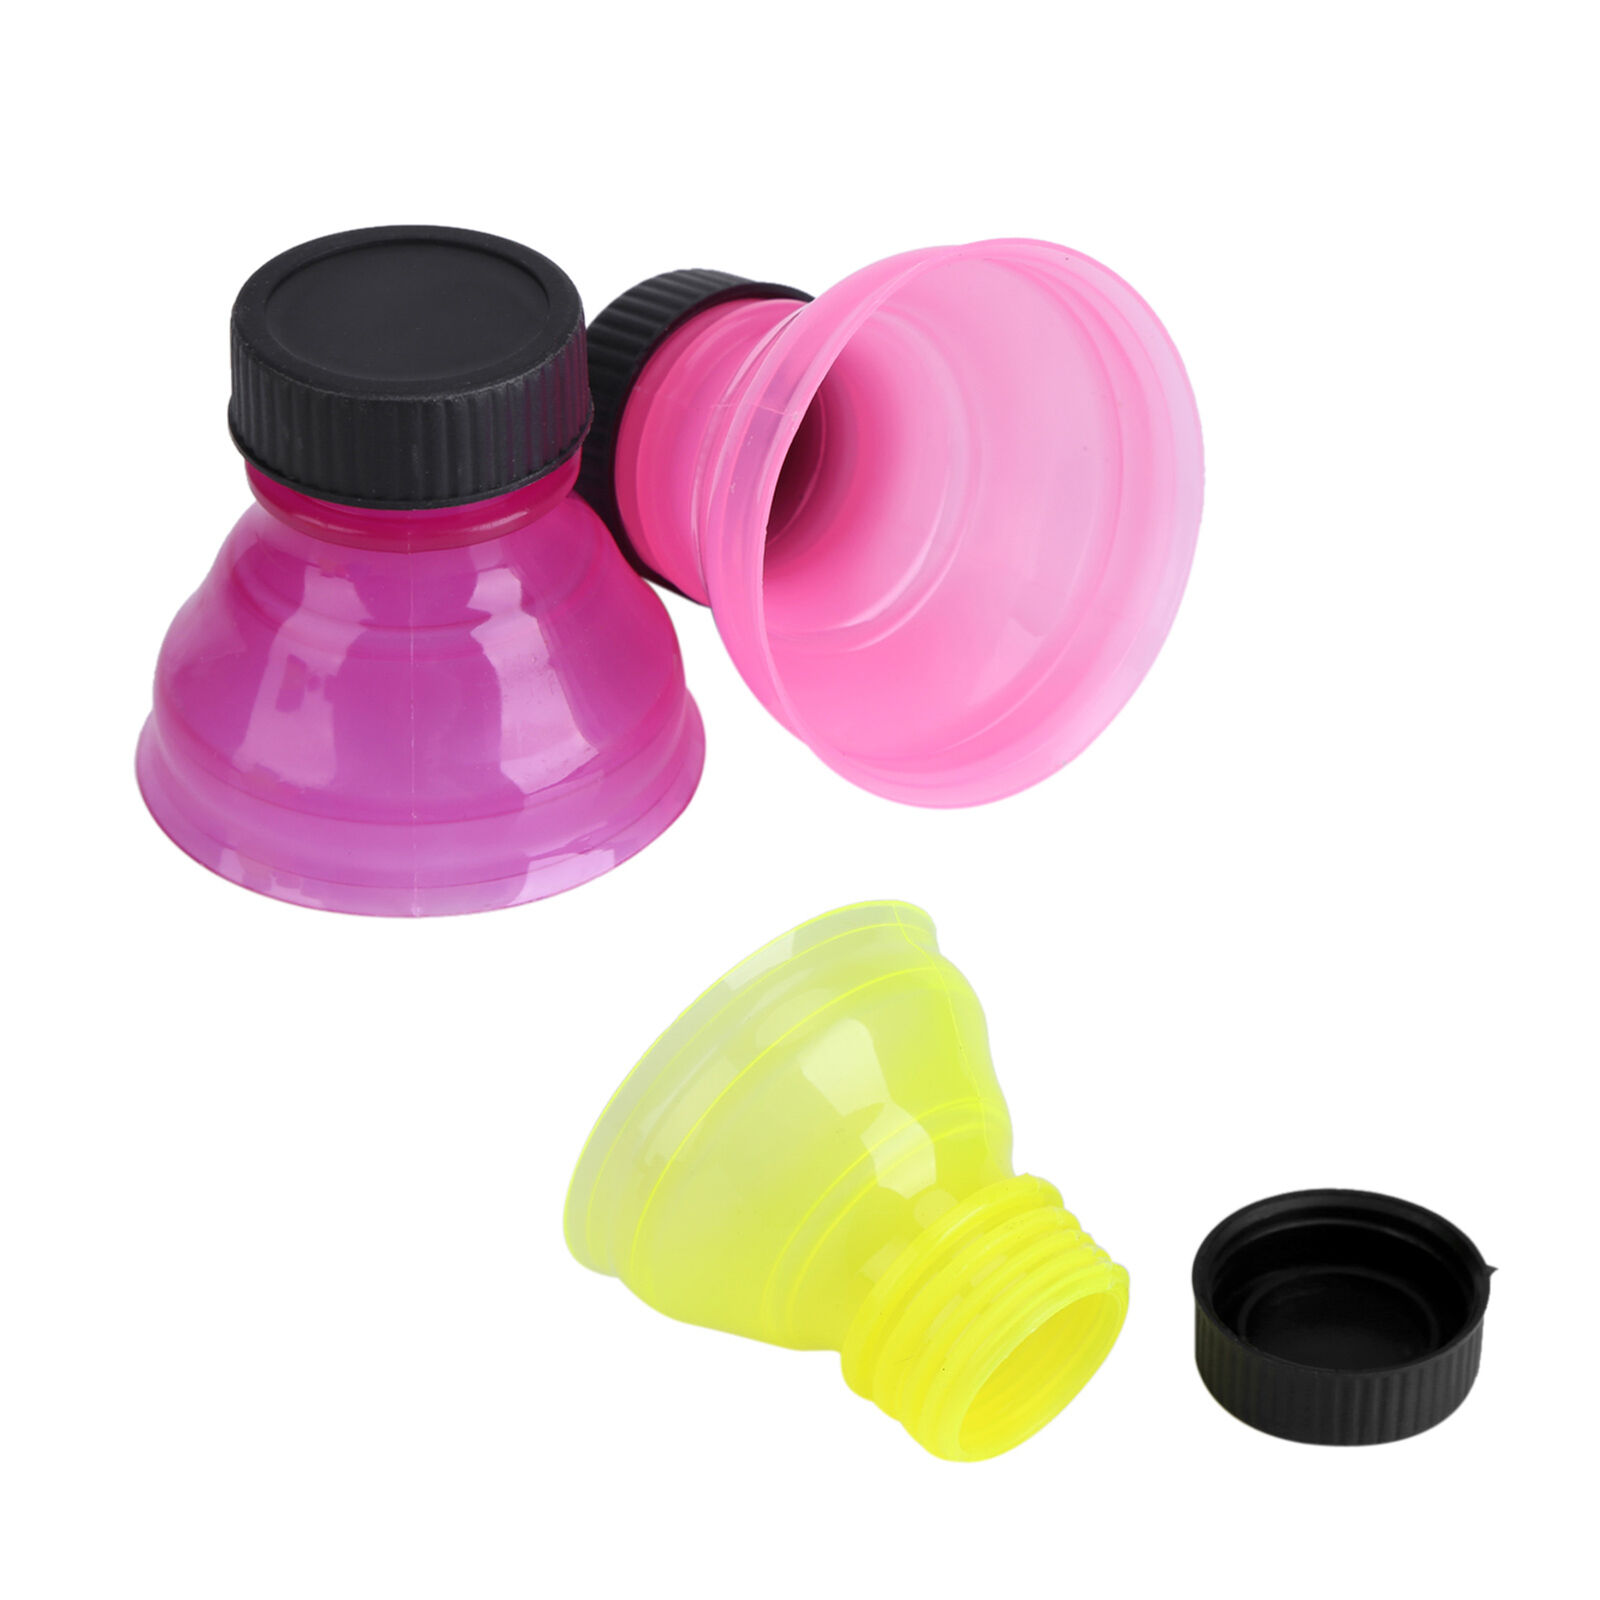 6Pcs Bottle Caps Reusable Bottle Caps For Cool Soda Drink Drink Unbranded Does not apply - фотография #21